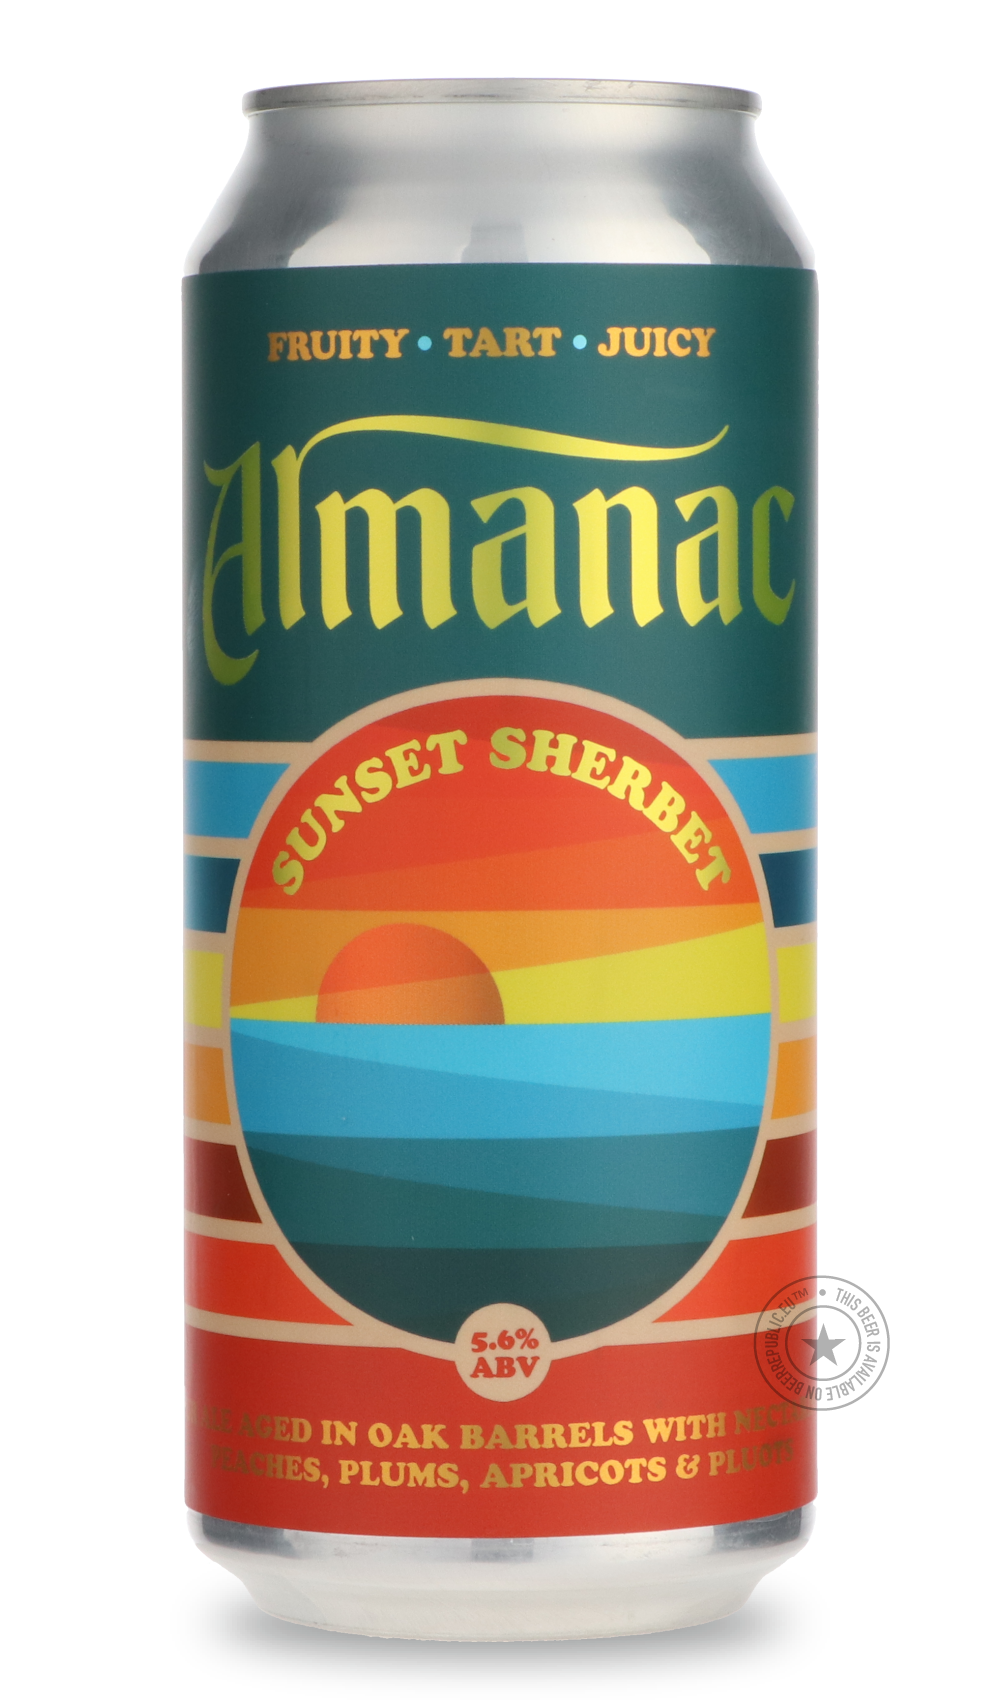 -Almanac- Sunshine Sherbet-Sour / Wild & Fruity- Only @ Beer Republic - The best online beer store for American & Canadian craft beer - Buy beer online from the USA and Canada - Bier online kopen - Amerikaans bier kopen - Craft beer store - Craft beer kopen - Amerikanisch bier kaufen - Bier online kaufen - Acheter biere online - IPA - Stout - Porter - New England IPA - Hazy IPA - Imperial Stout - Barrel Aged - Barrel Aged Imperial Stout - Brown - Dark beer - Blond - Blonde - Pilsner - Lager - Wheat - Weizen